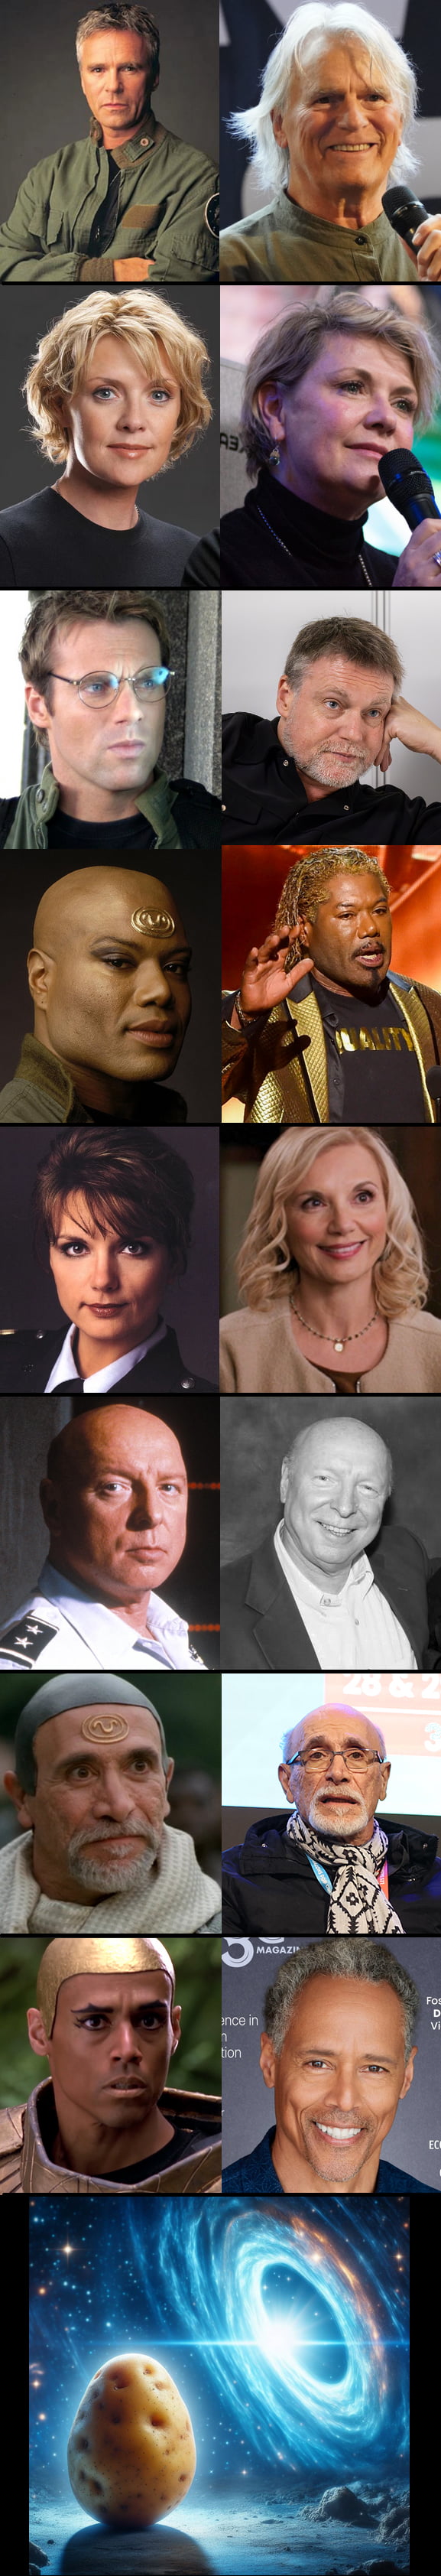 Stargate cast then and now 2023 Image